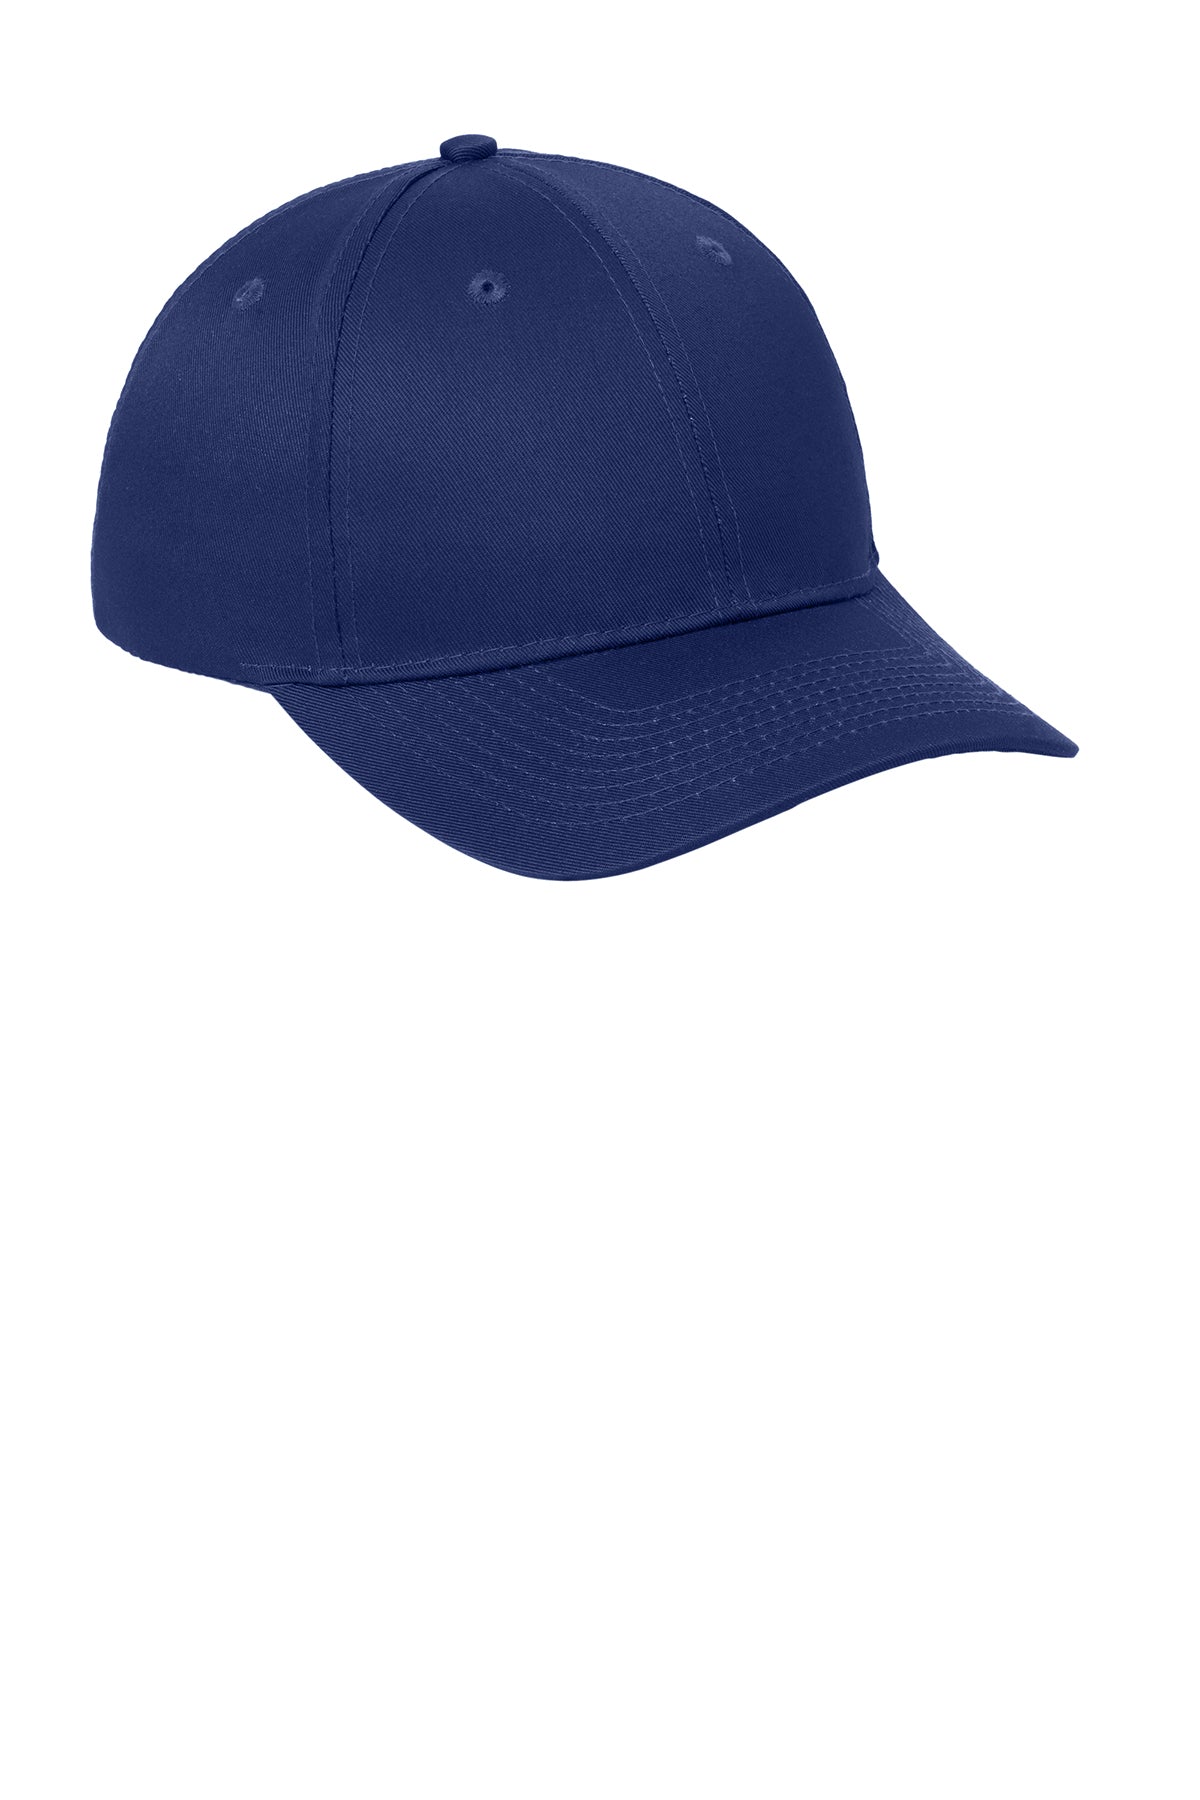 Port Authority Uniforming Branded Twill Caps, Royal